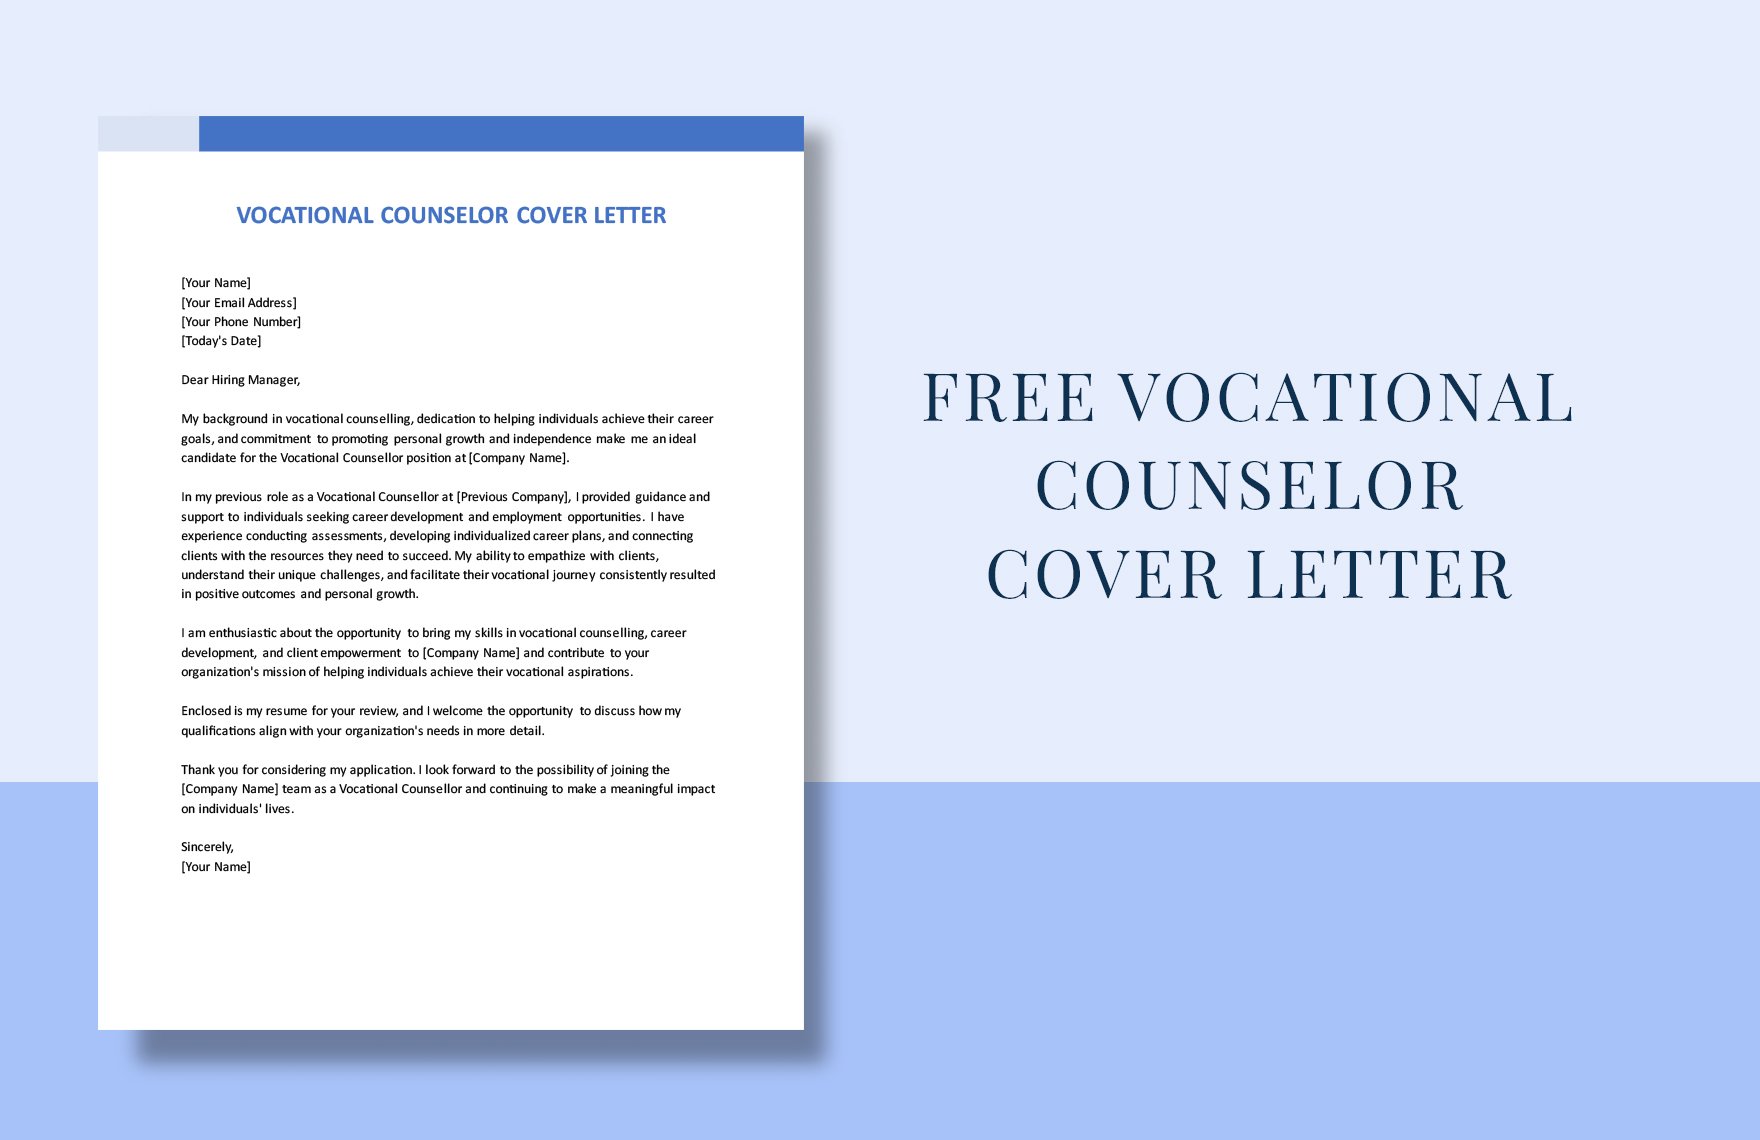 Vocational Counselor Cover Letter in Word, Google Docs, PDF